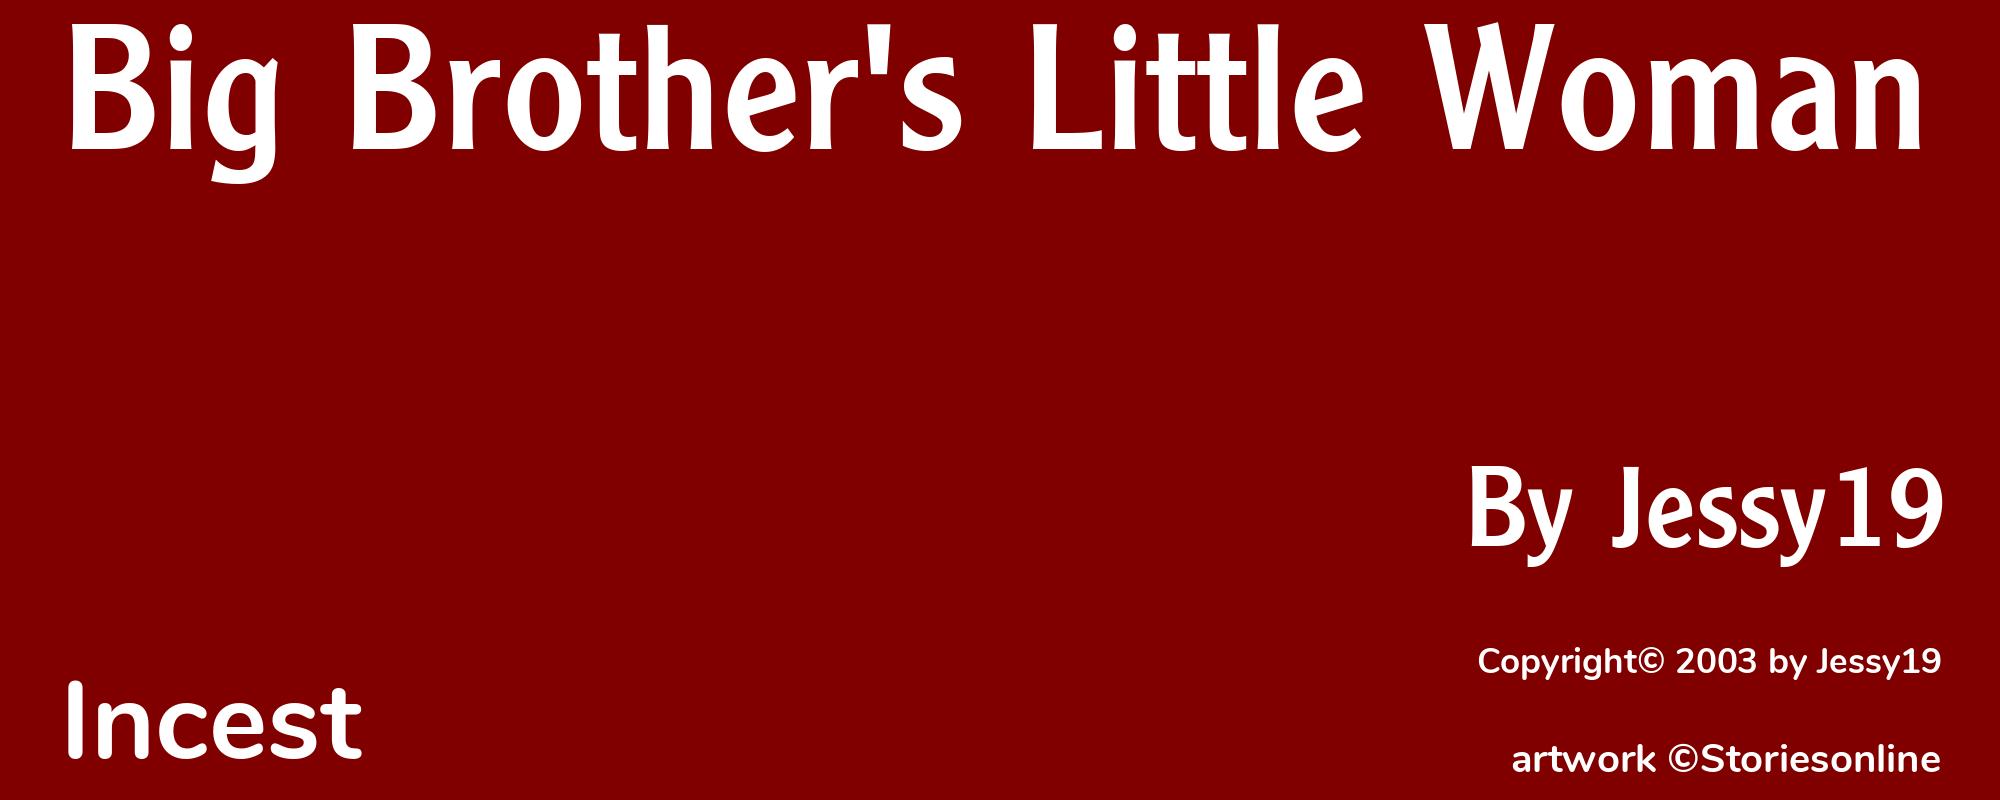 Big Brother's Little Woman - Cover